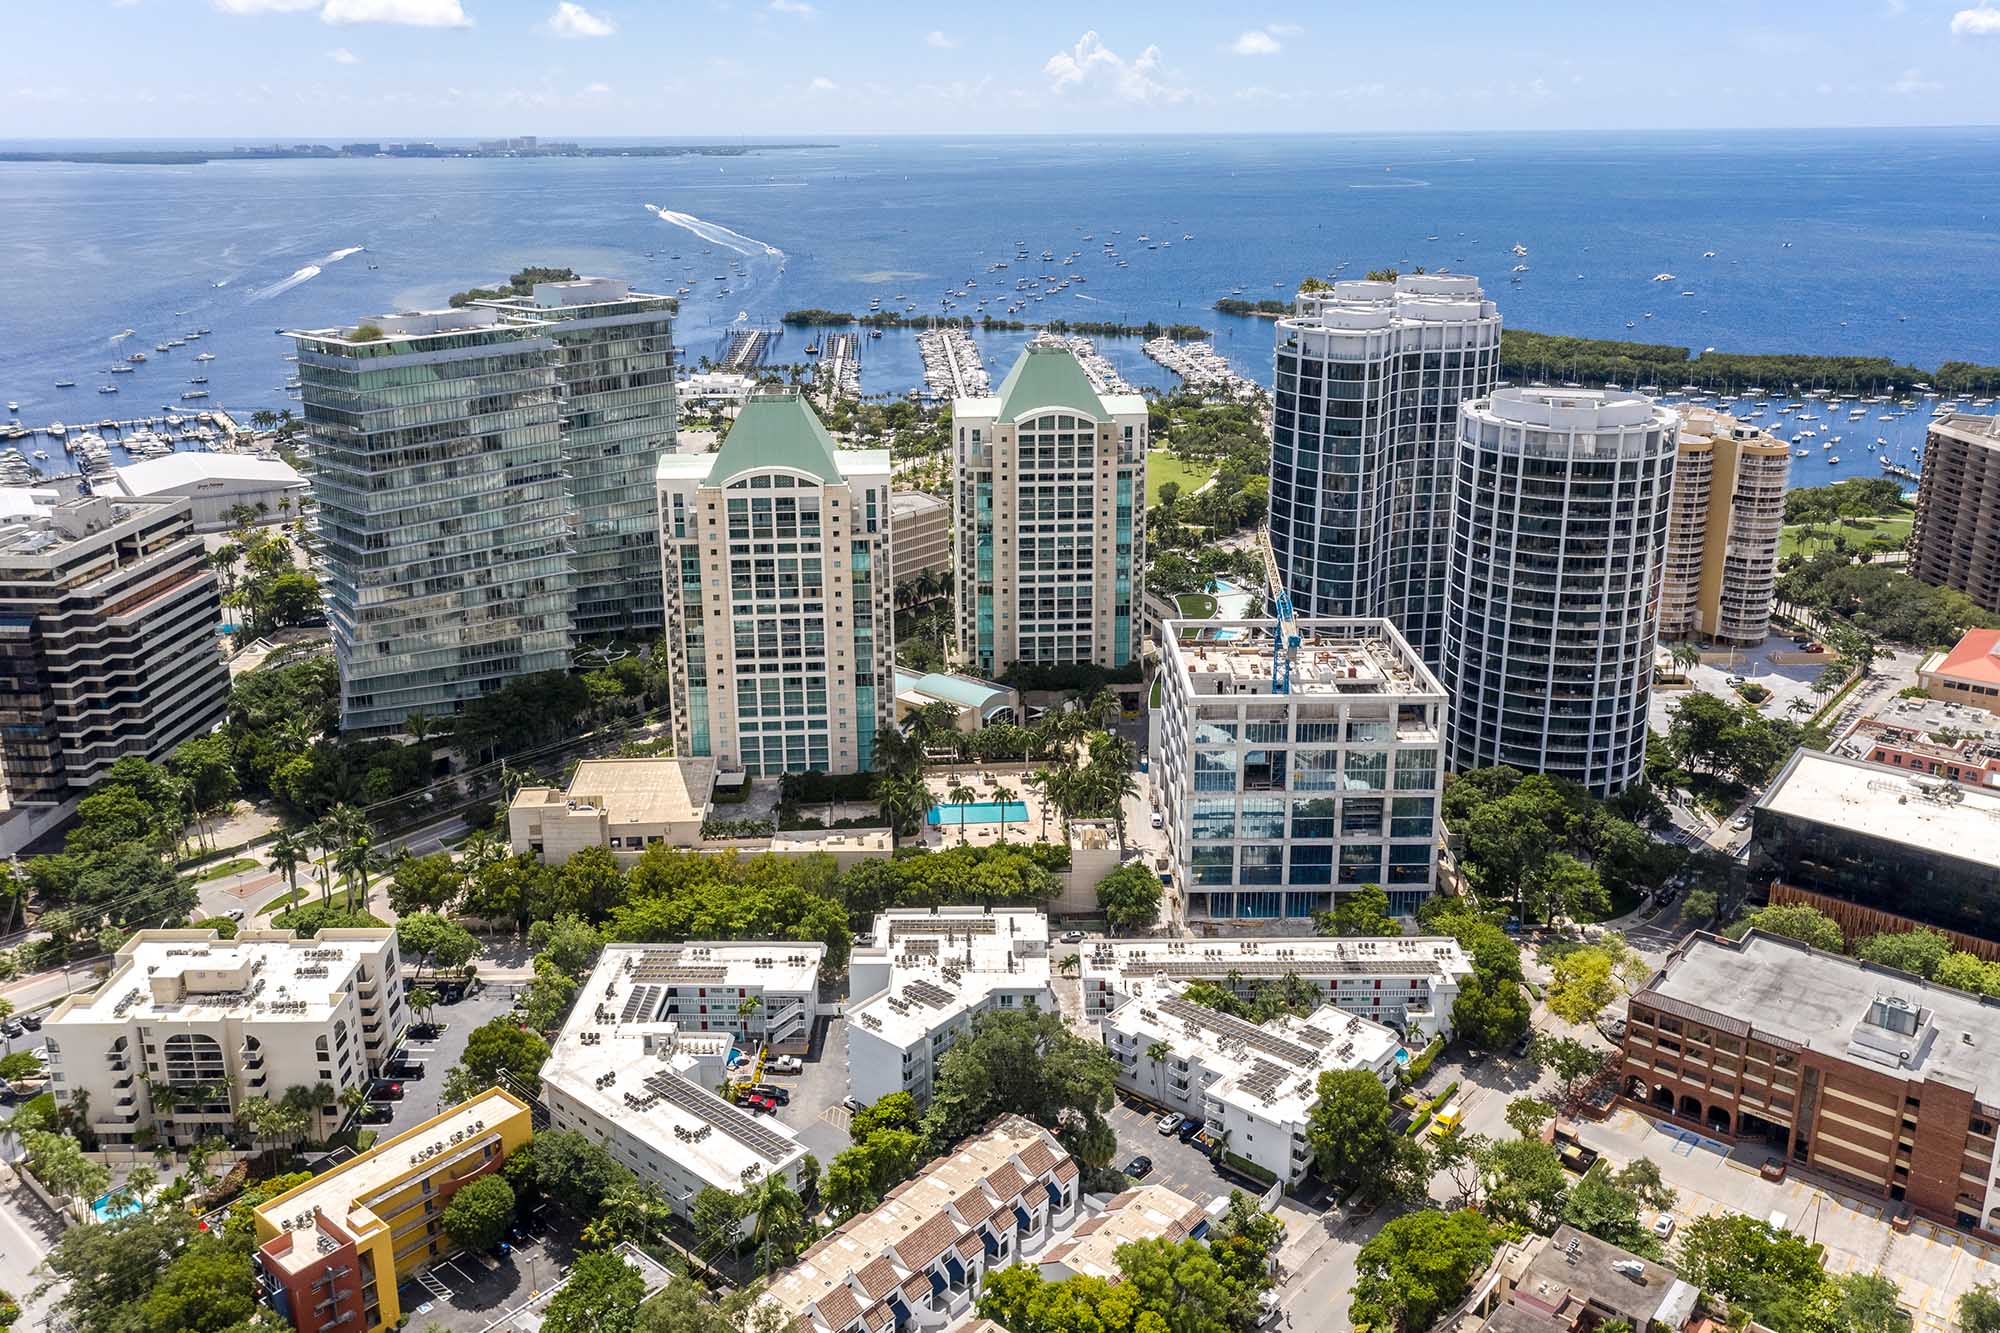 Avison Young closes sale on Marriott hotel property in Miami’s Coconut Grove neighborhood